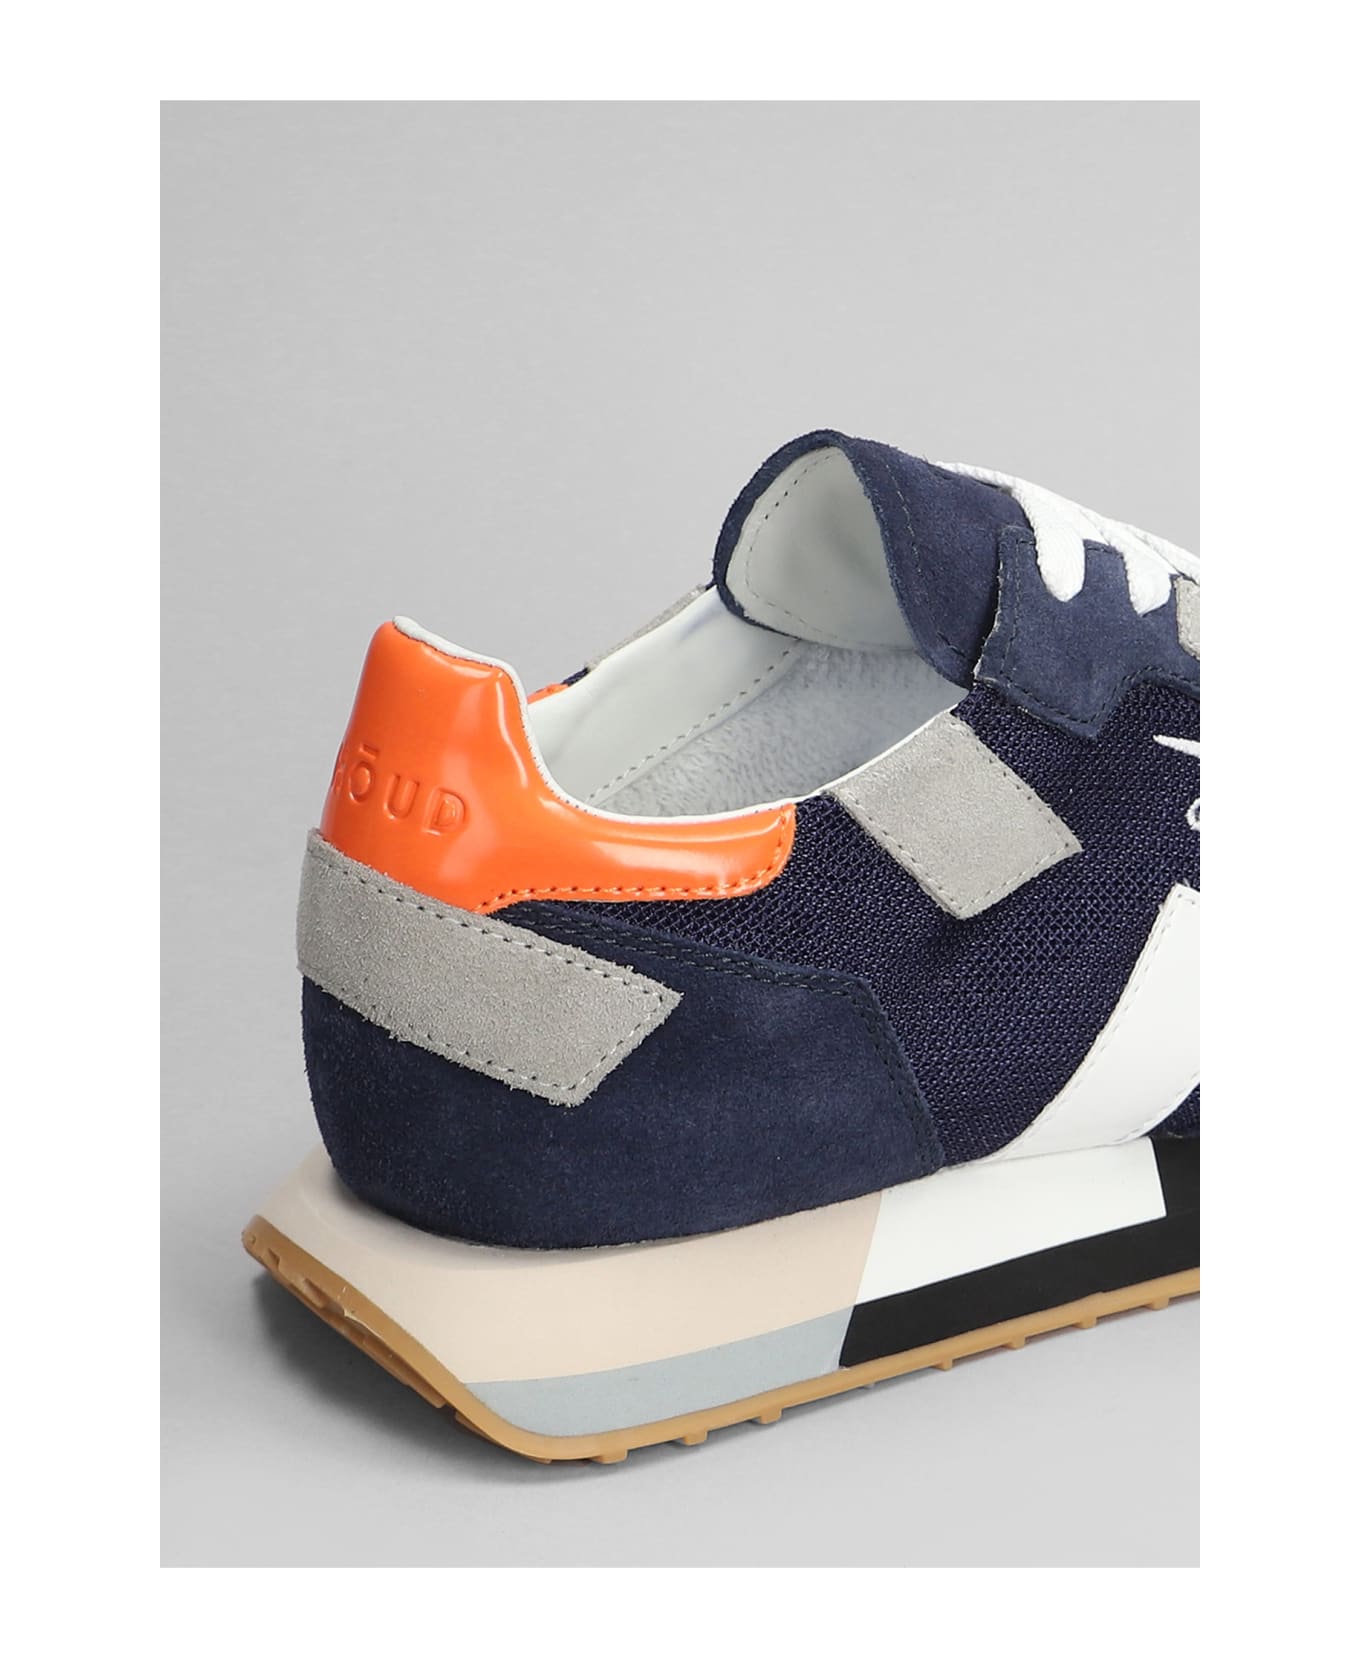 GHOUD Rush Multi Sneakers In Blue Suede And Fabric - blue